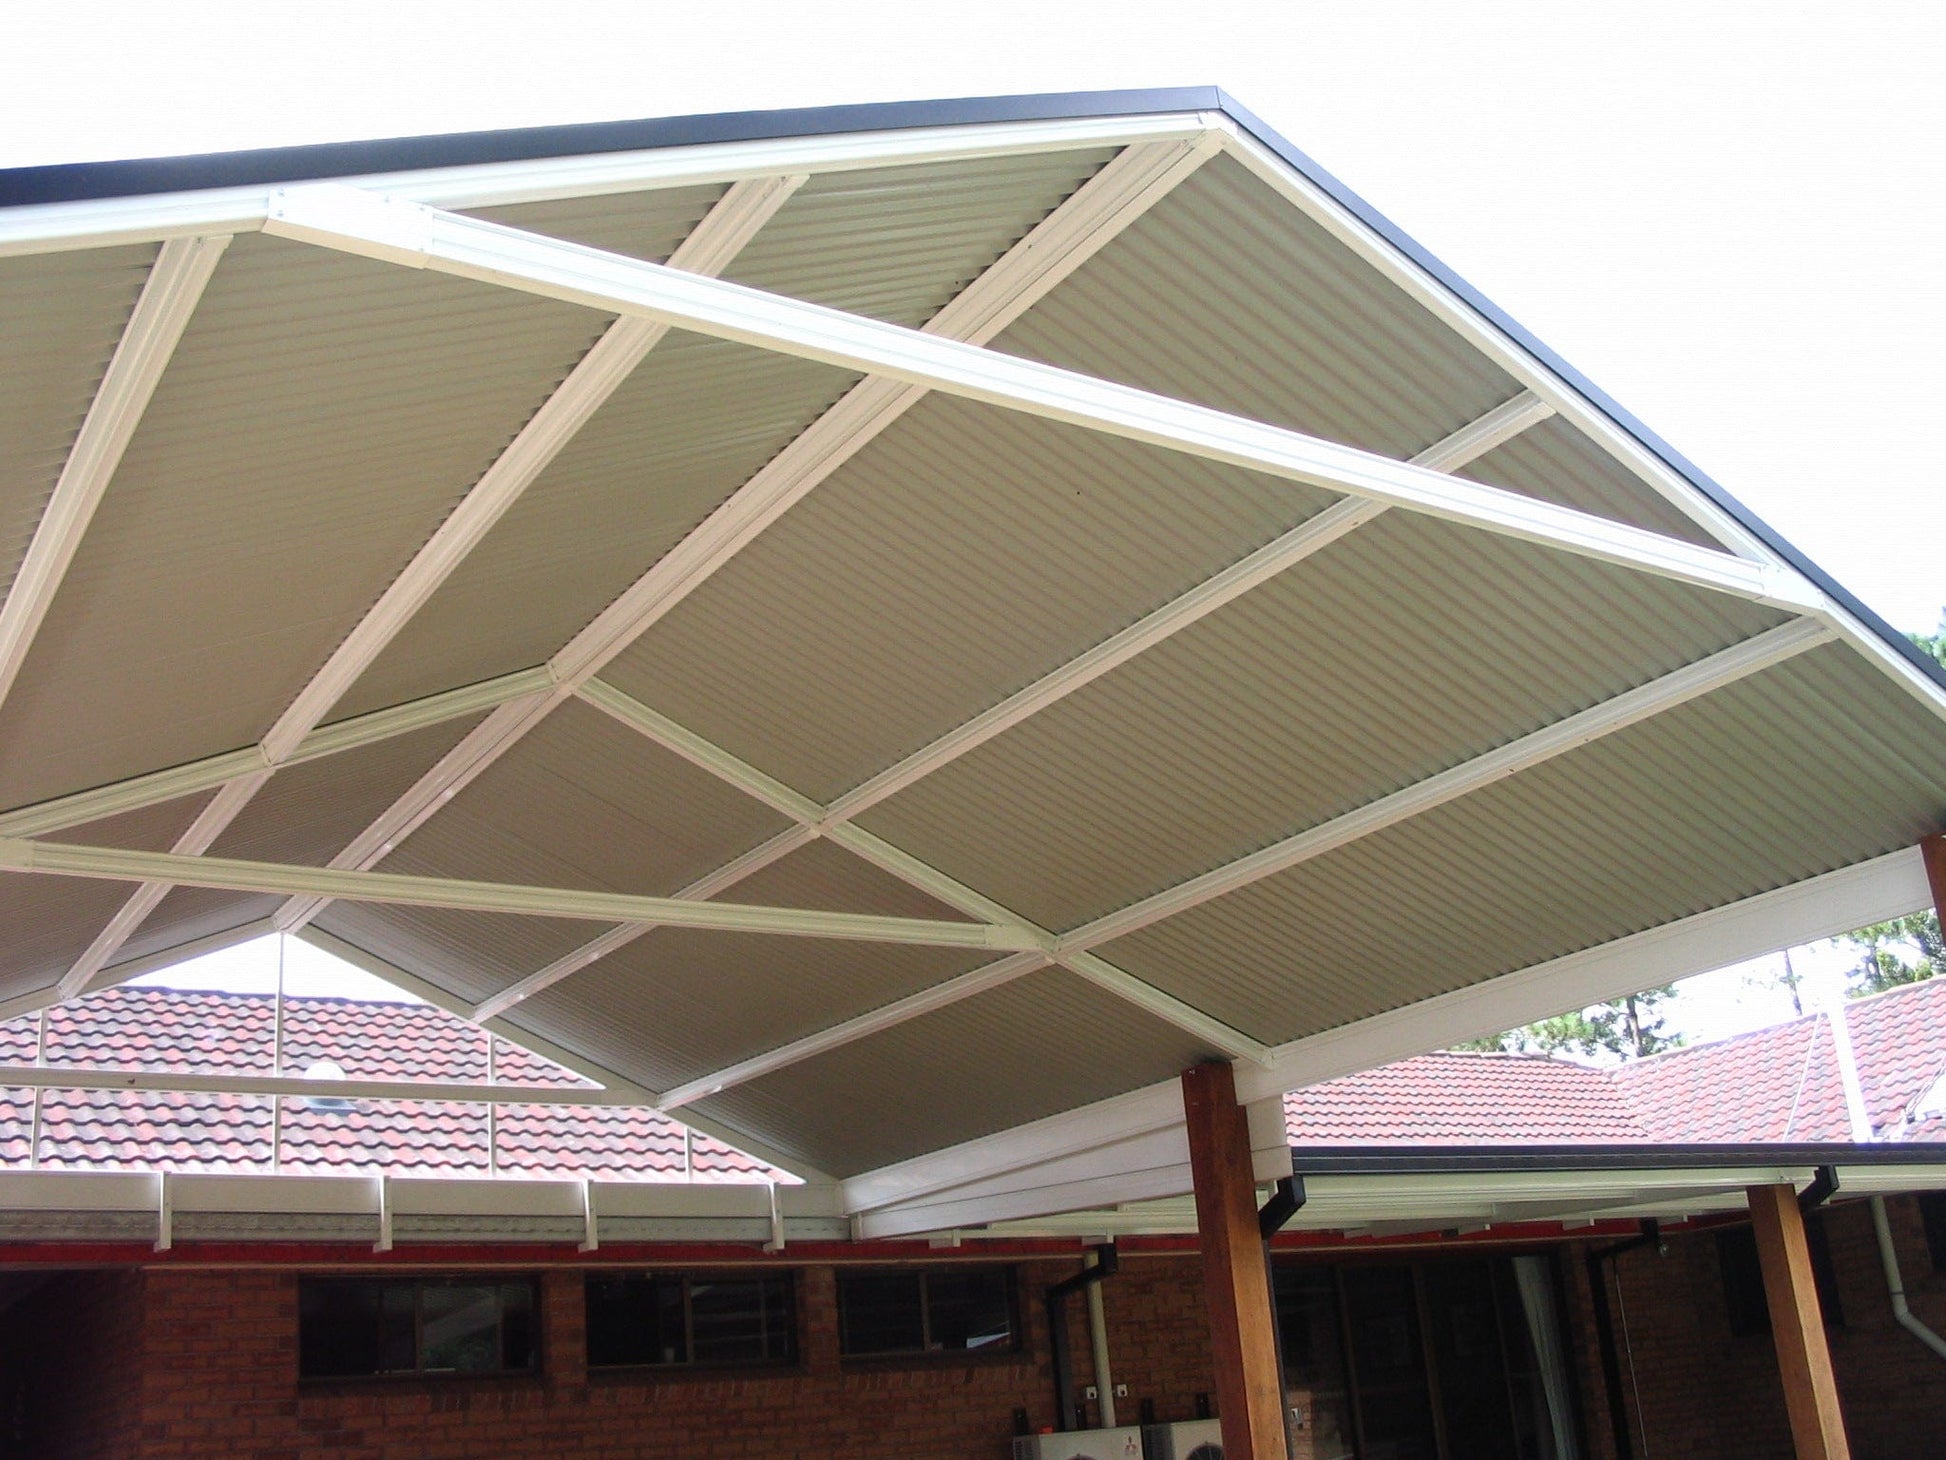 Non-Insulated Gable Patio - 9m x 6m- Supply & Install QHI National